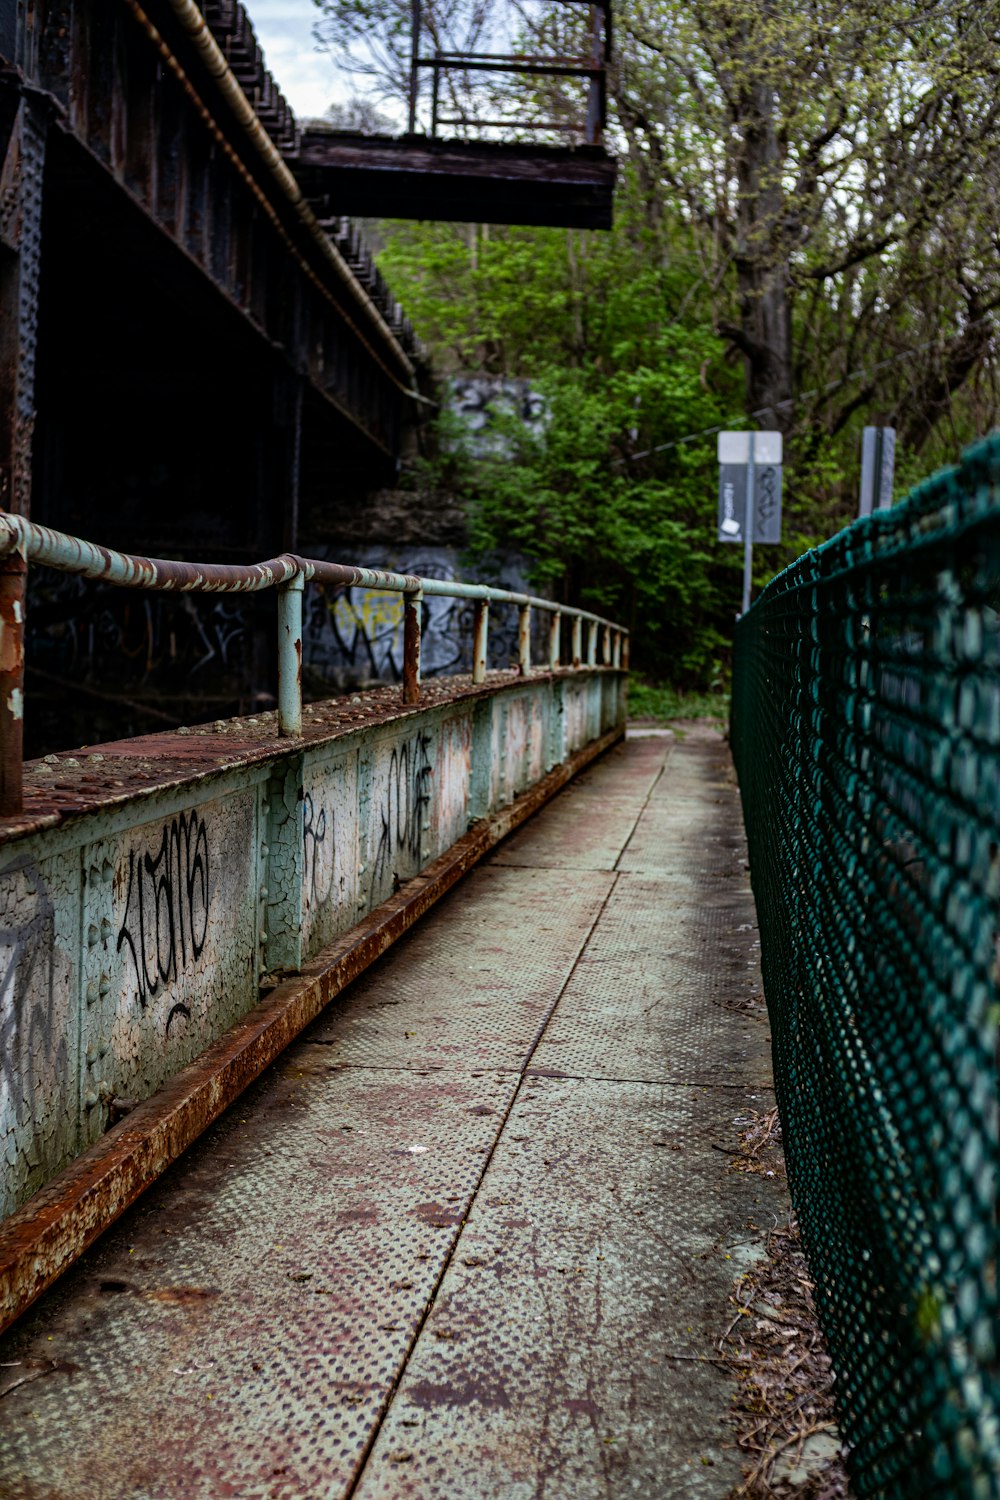 a rusty bridge with graffiti on the side of it